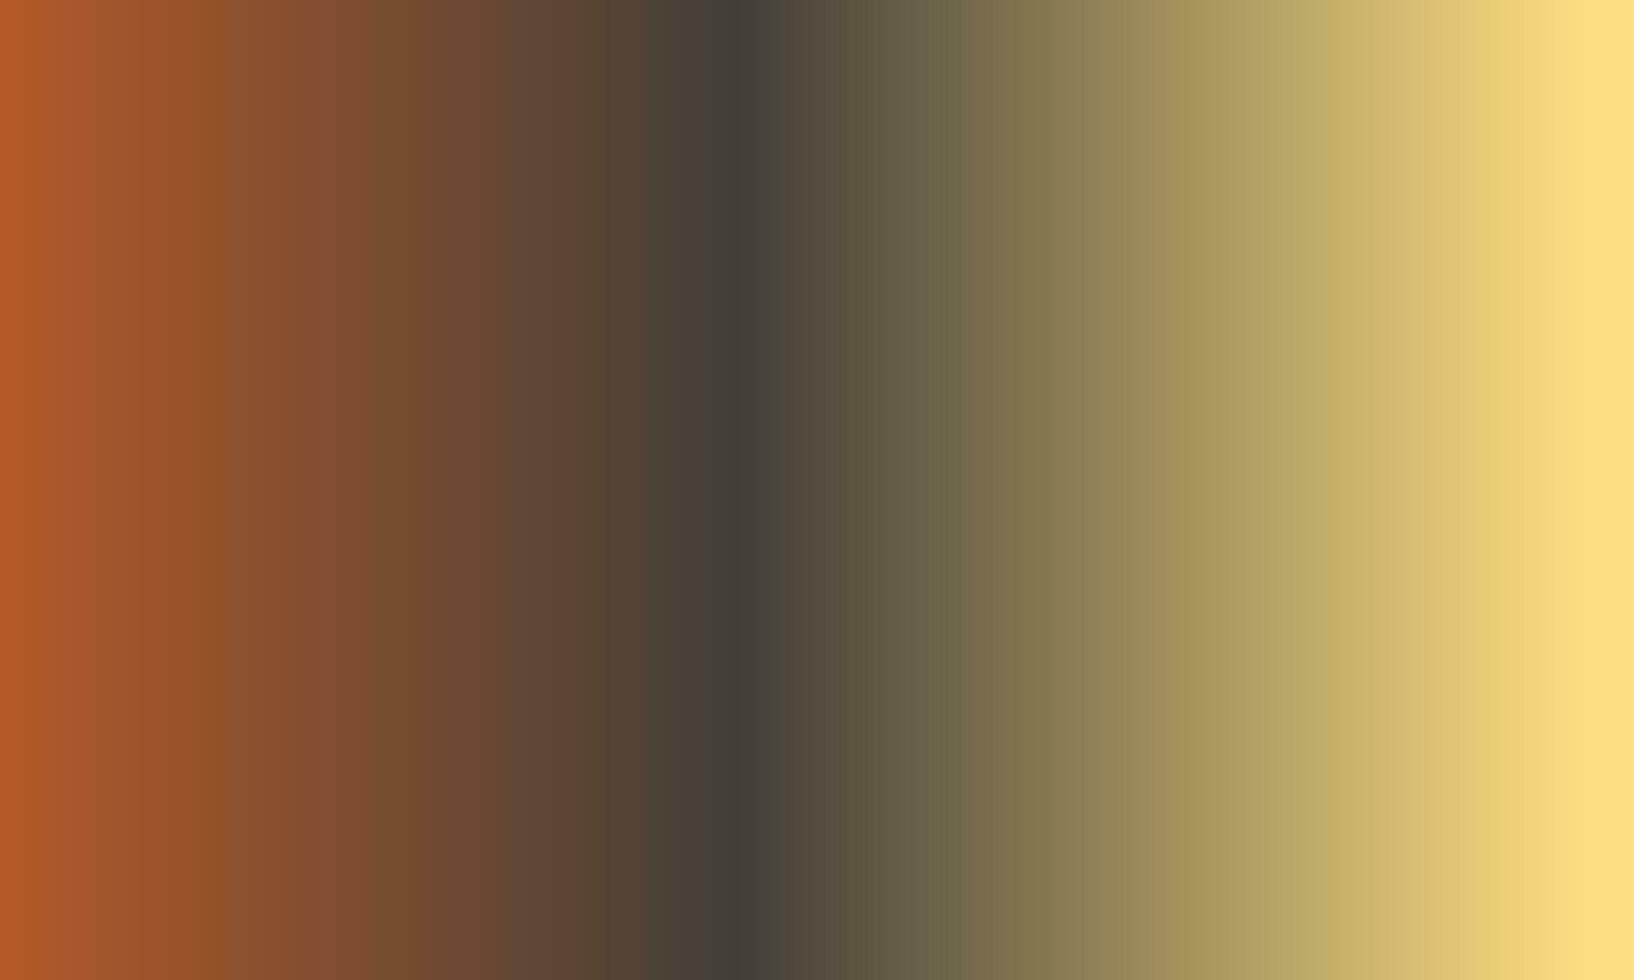 Design simple yellow,grey and brown gradient color illustration background photo